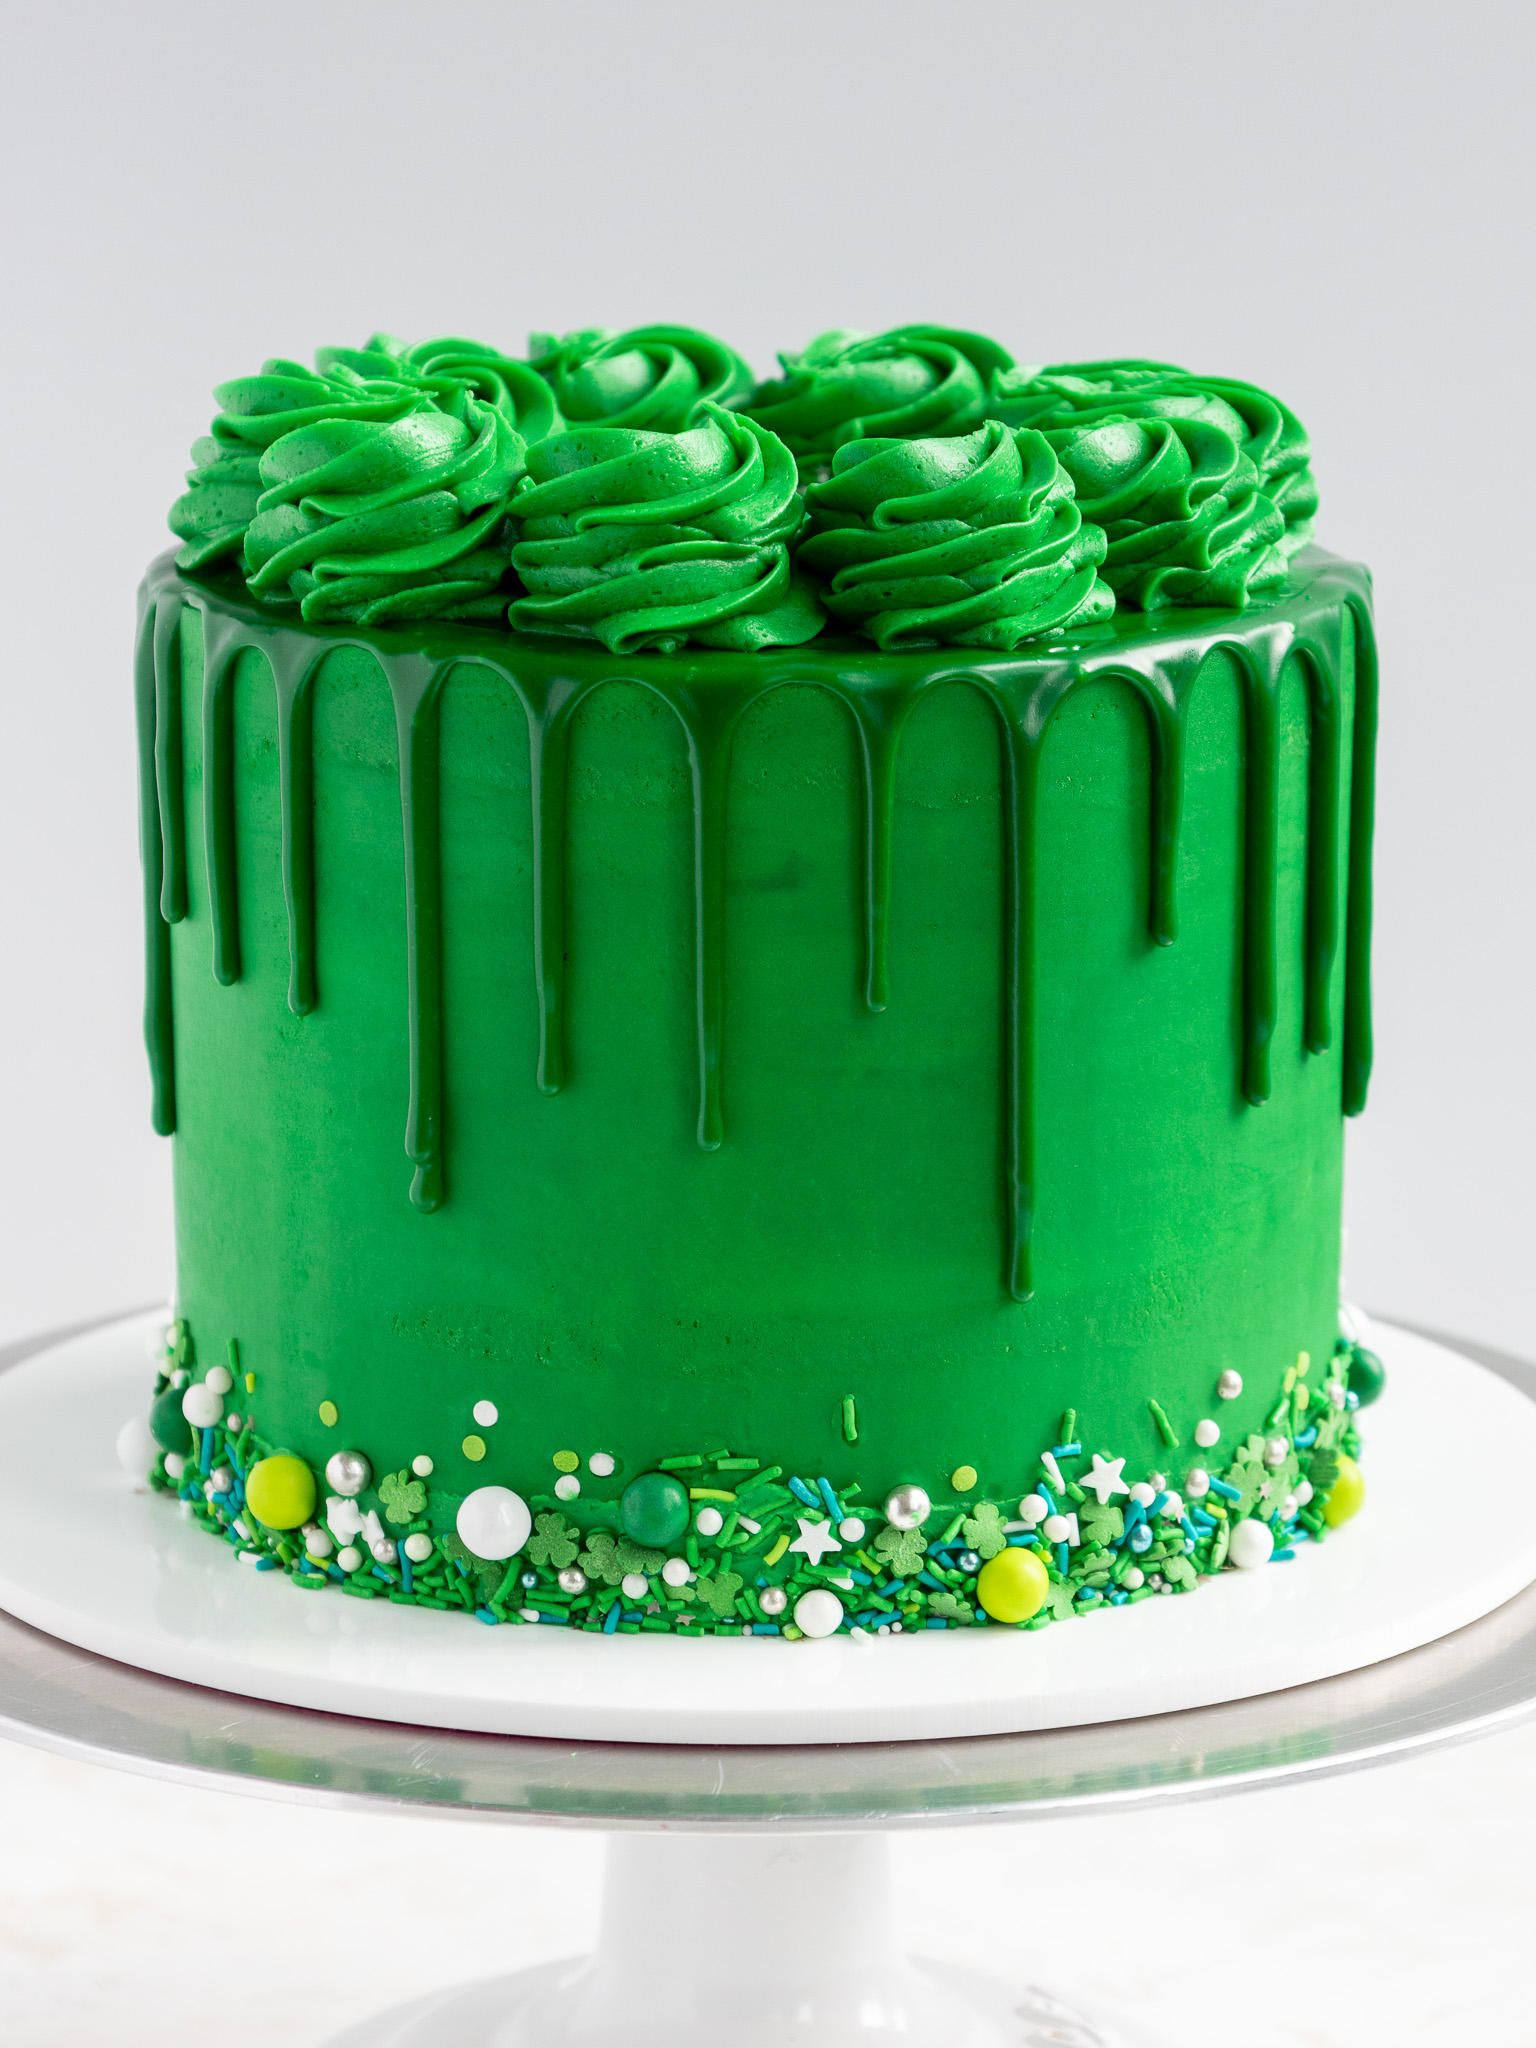 image of an adorable green drip cake that's been decorated to celebrate st. patrick's day